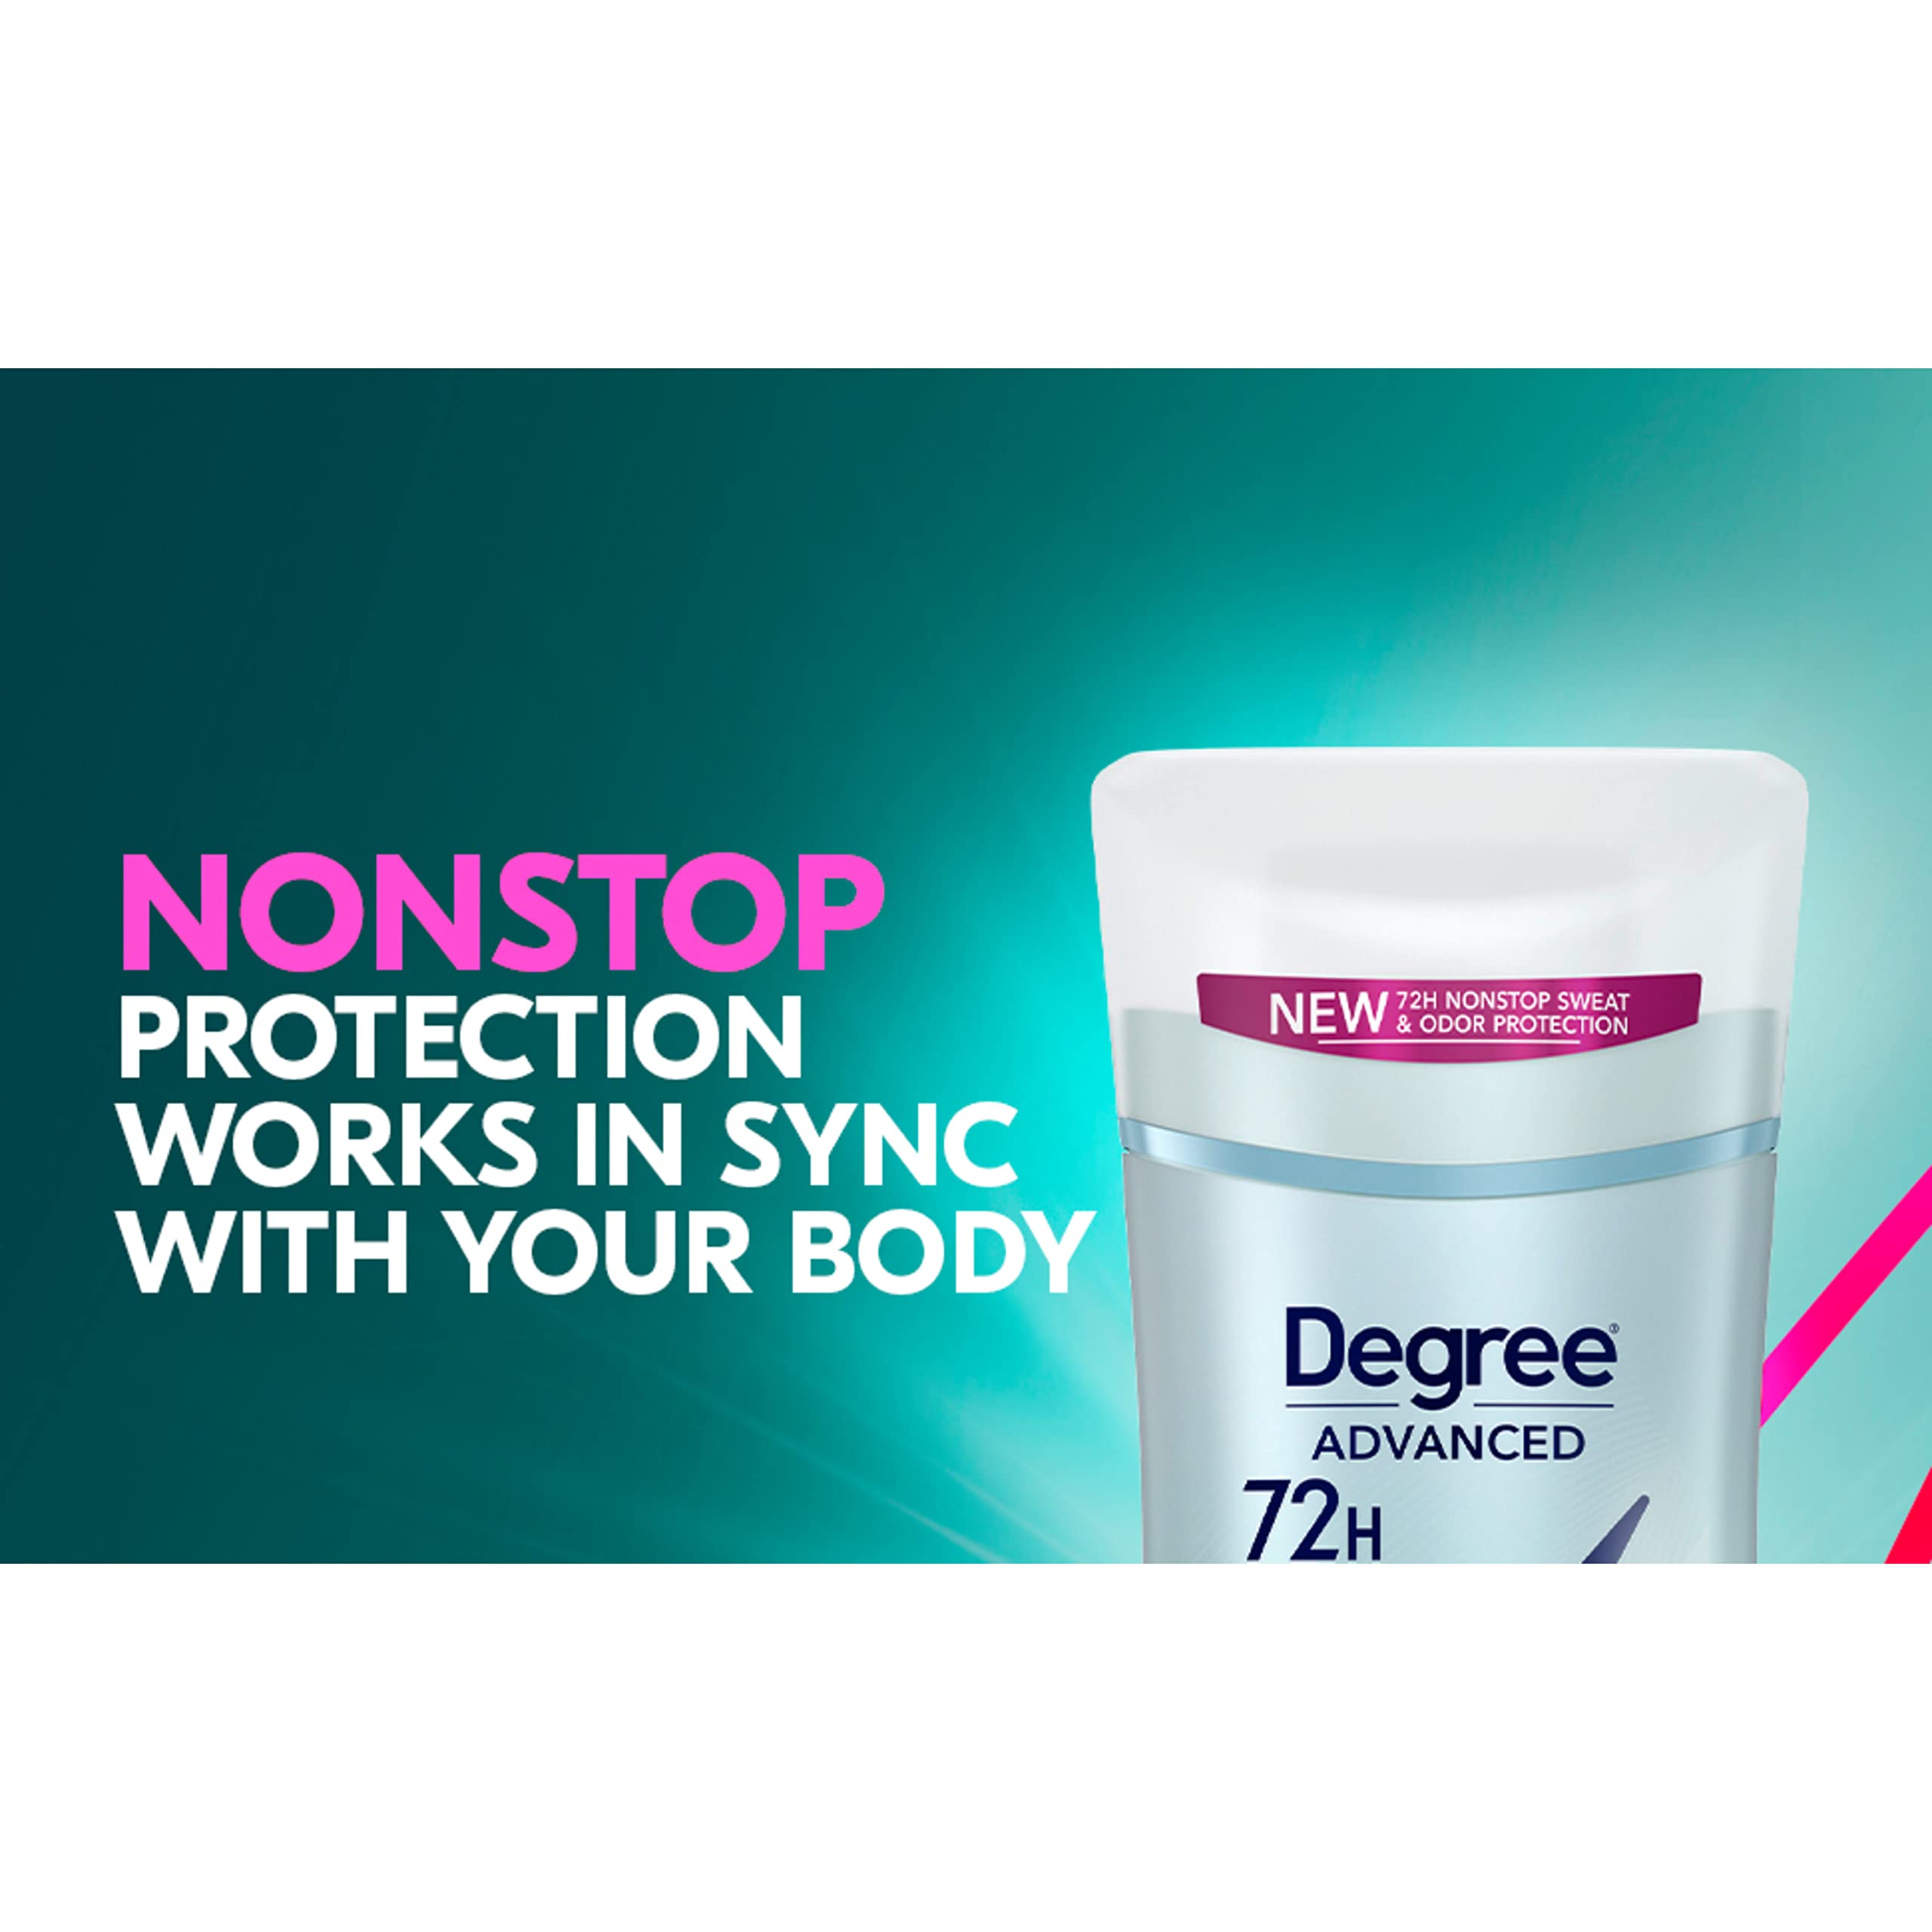 Degree Advanced Antiperspirant Deodorant 72-Hour Sweat & Odor Protection White Flowers & Lychee Antiperspirant for Women with MotionSense Technology 2.6 oz